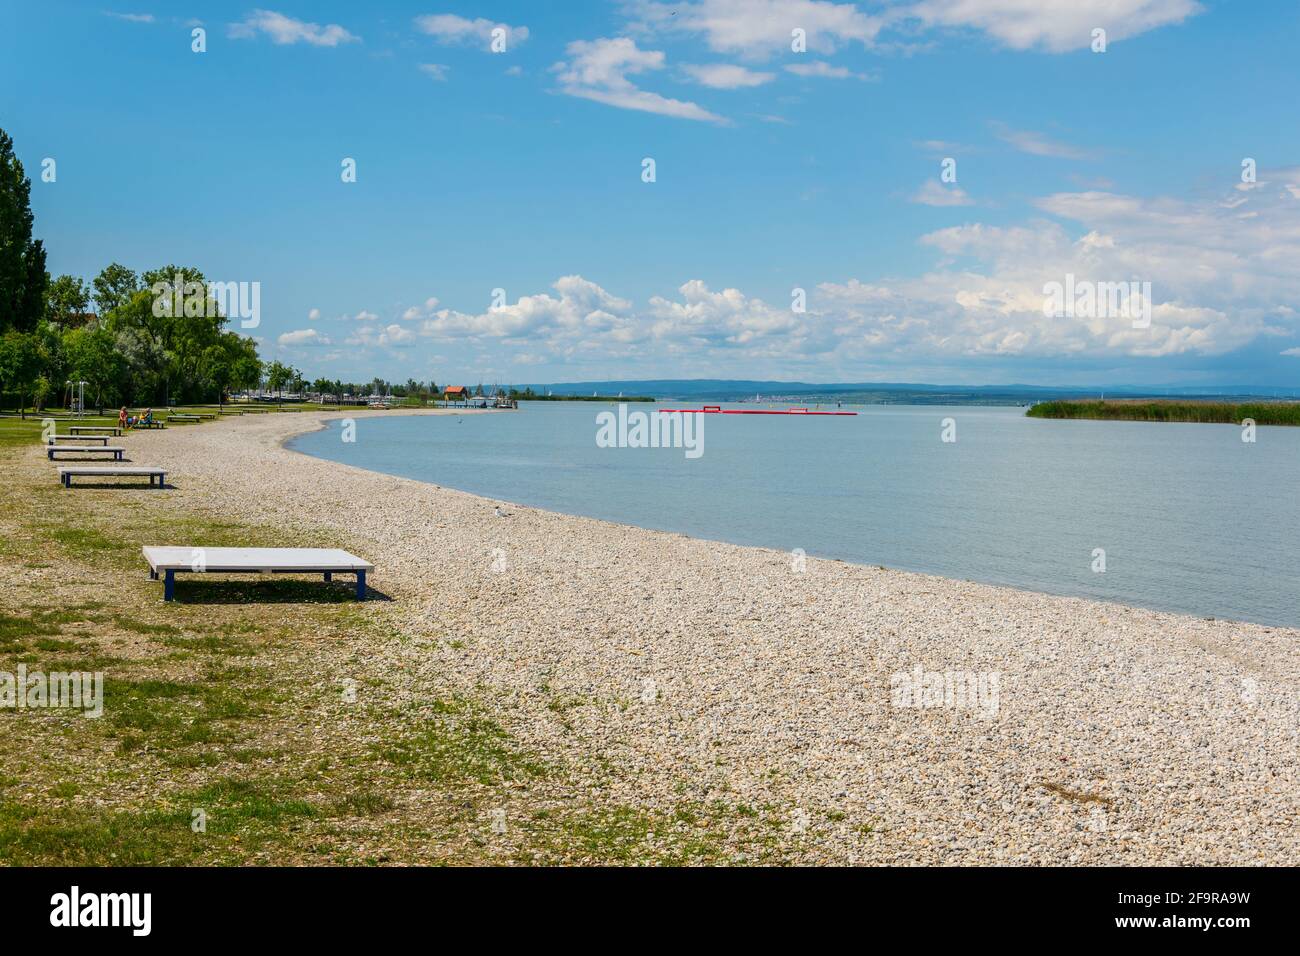 view of a beach in Podersdorf am see town in Austria Stock Photo